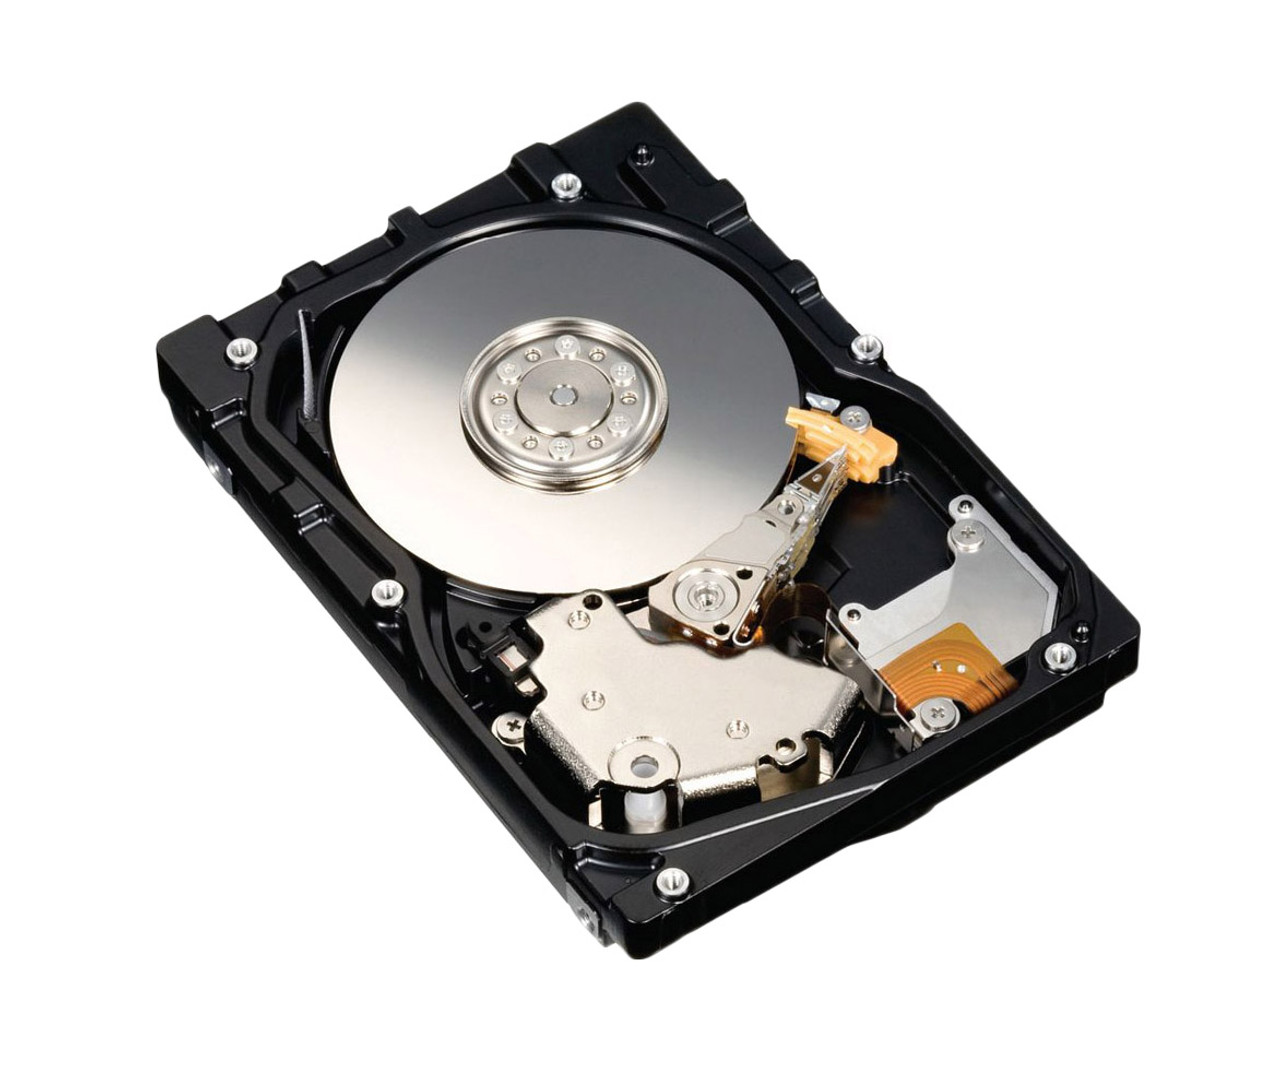 9SW066-158 - Seagate 300GB 15000RPM SAS 6.0Gbps 64MB Cache 2.5-inch Hard Drive